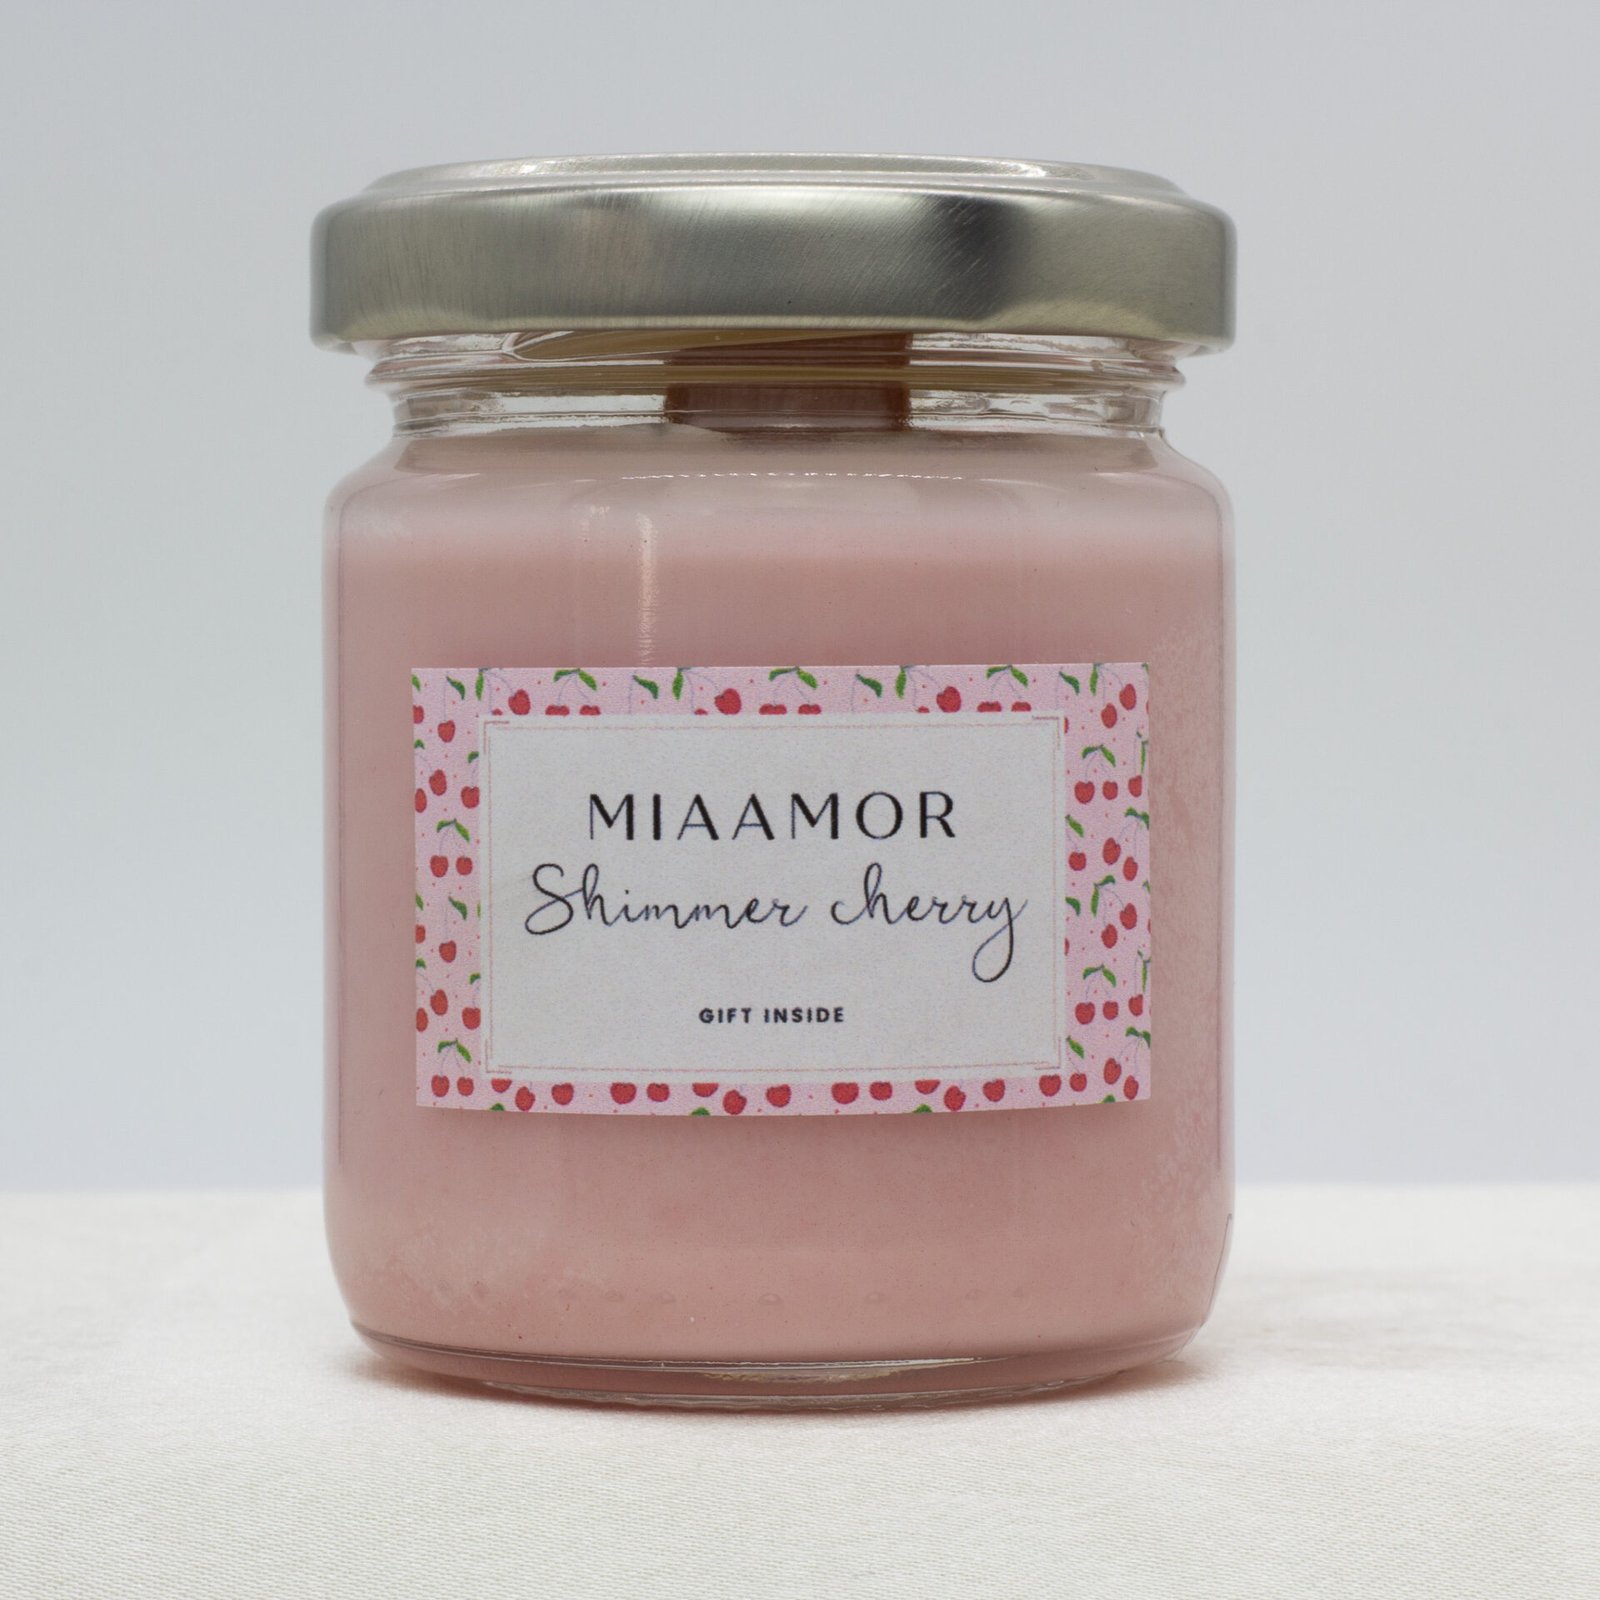 Cherry scented jewellery candle